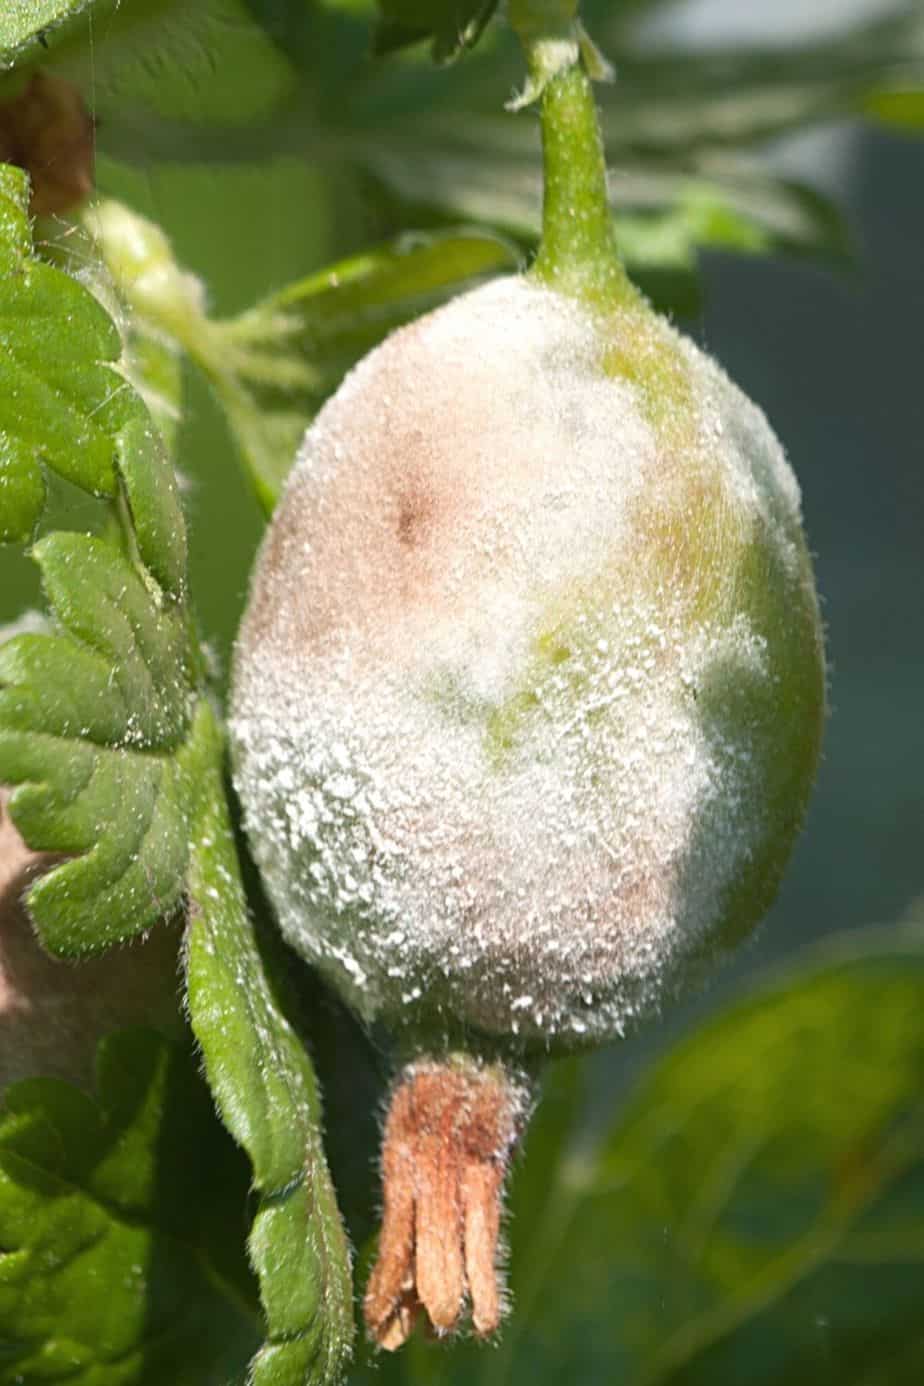 Powdery mildew appears as a whitish-powder like growth on the plant